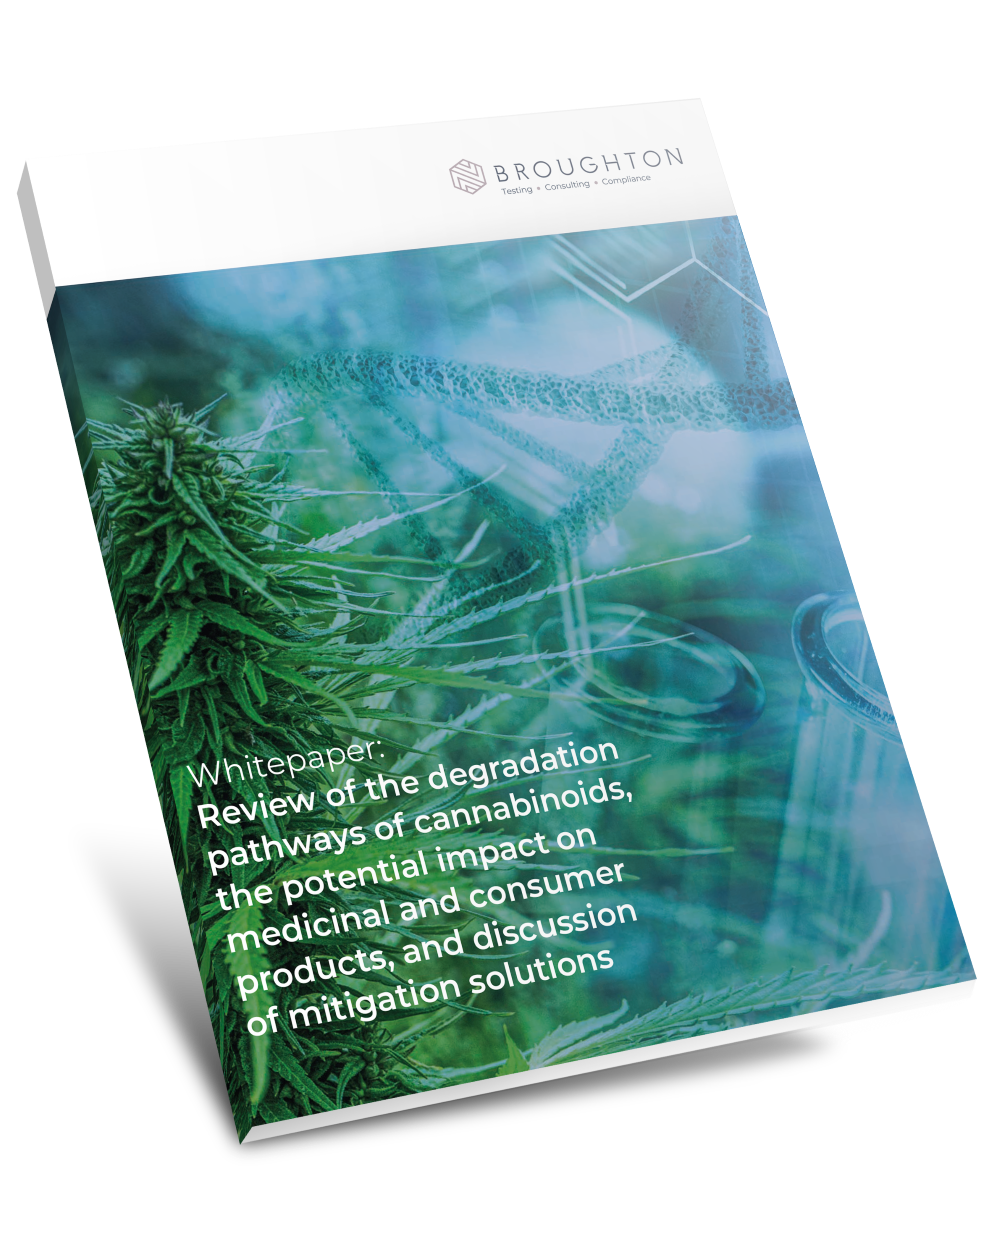 LP---Whitepaper:-Review-of-the-degradation-pathways-of-cannabinoids